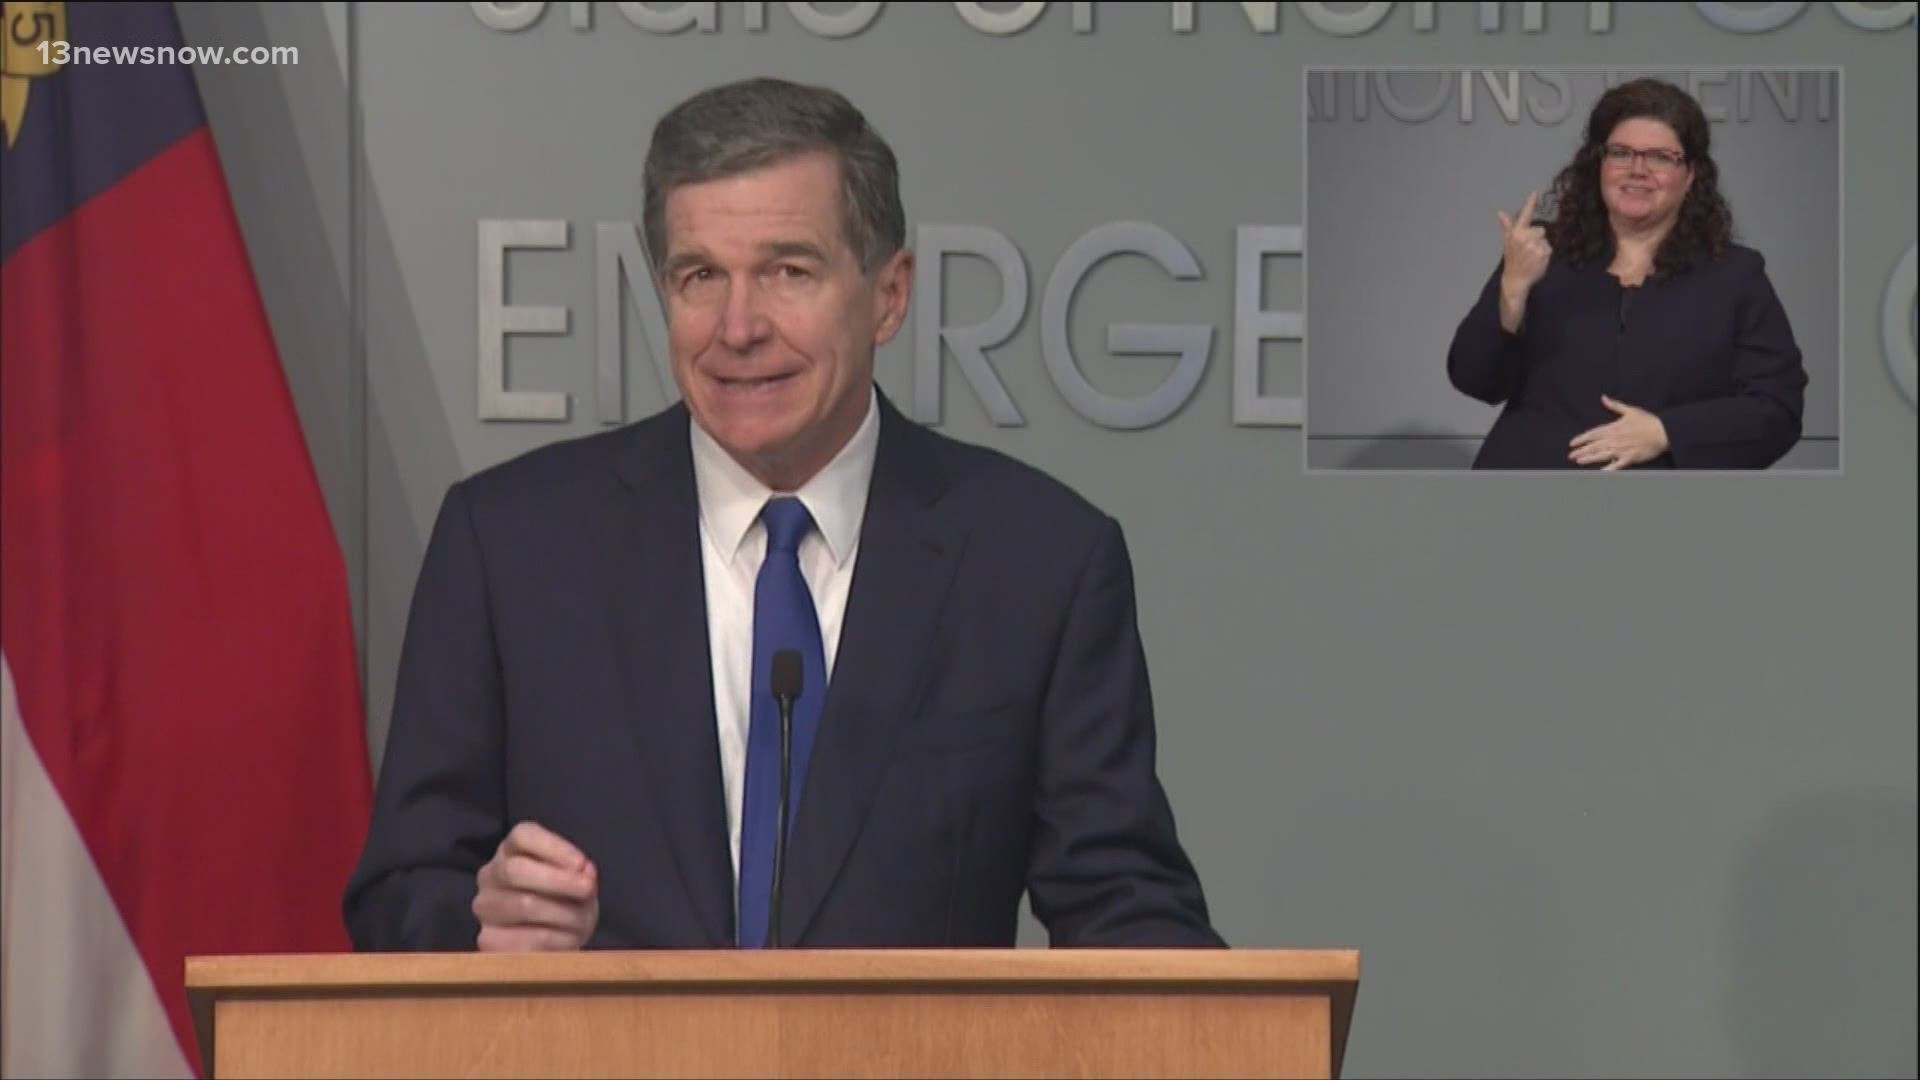 On Governor Roy Cooper's June 24 coronavirus press briefing, he mandated face masks in public, and said Phase 3 would not start before July 17.